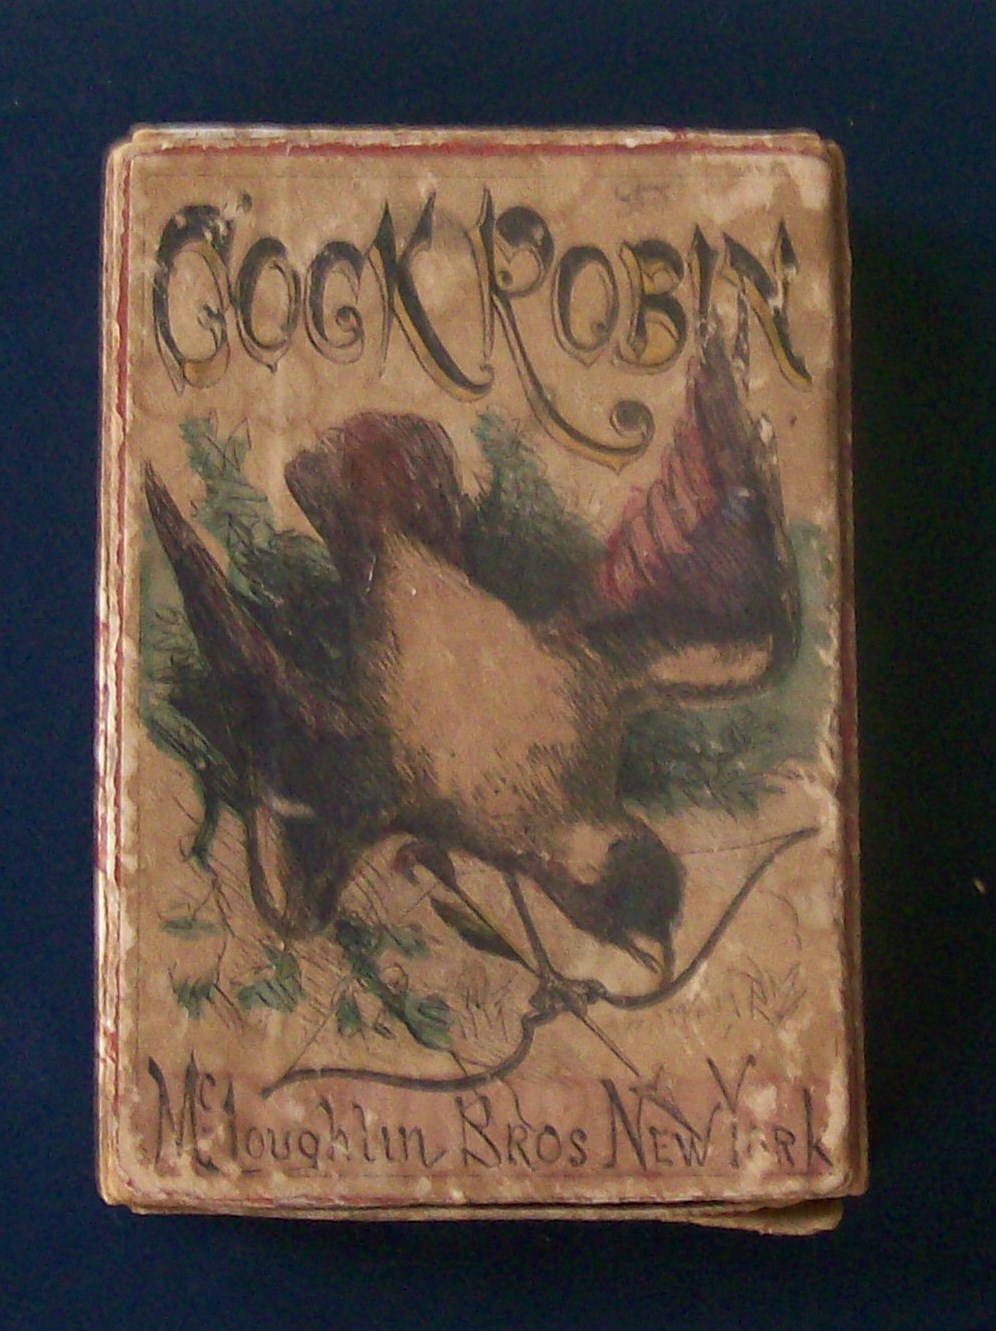 Antique Card Game of Cock Robin by Mcloughlin Brothers